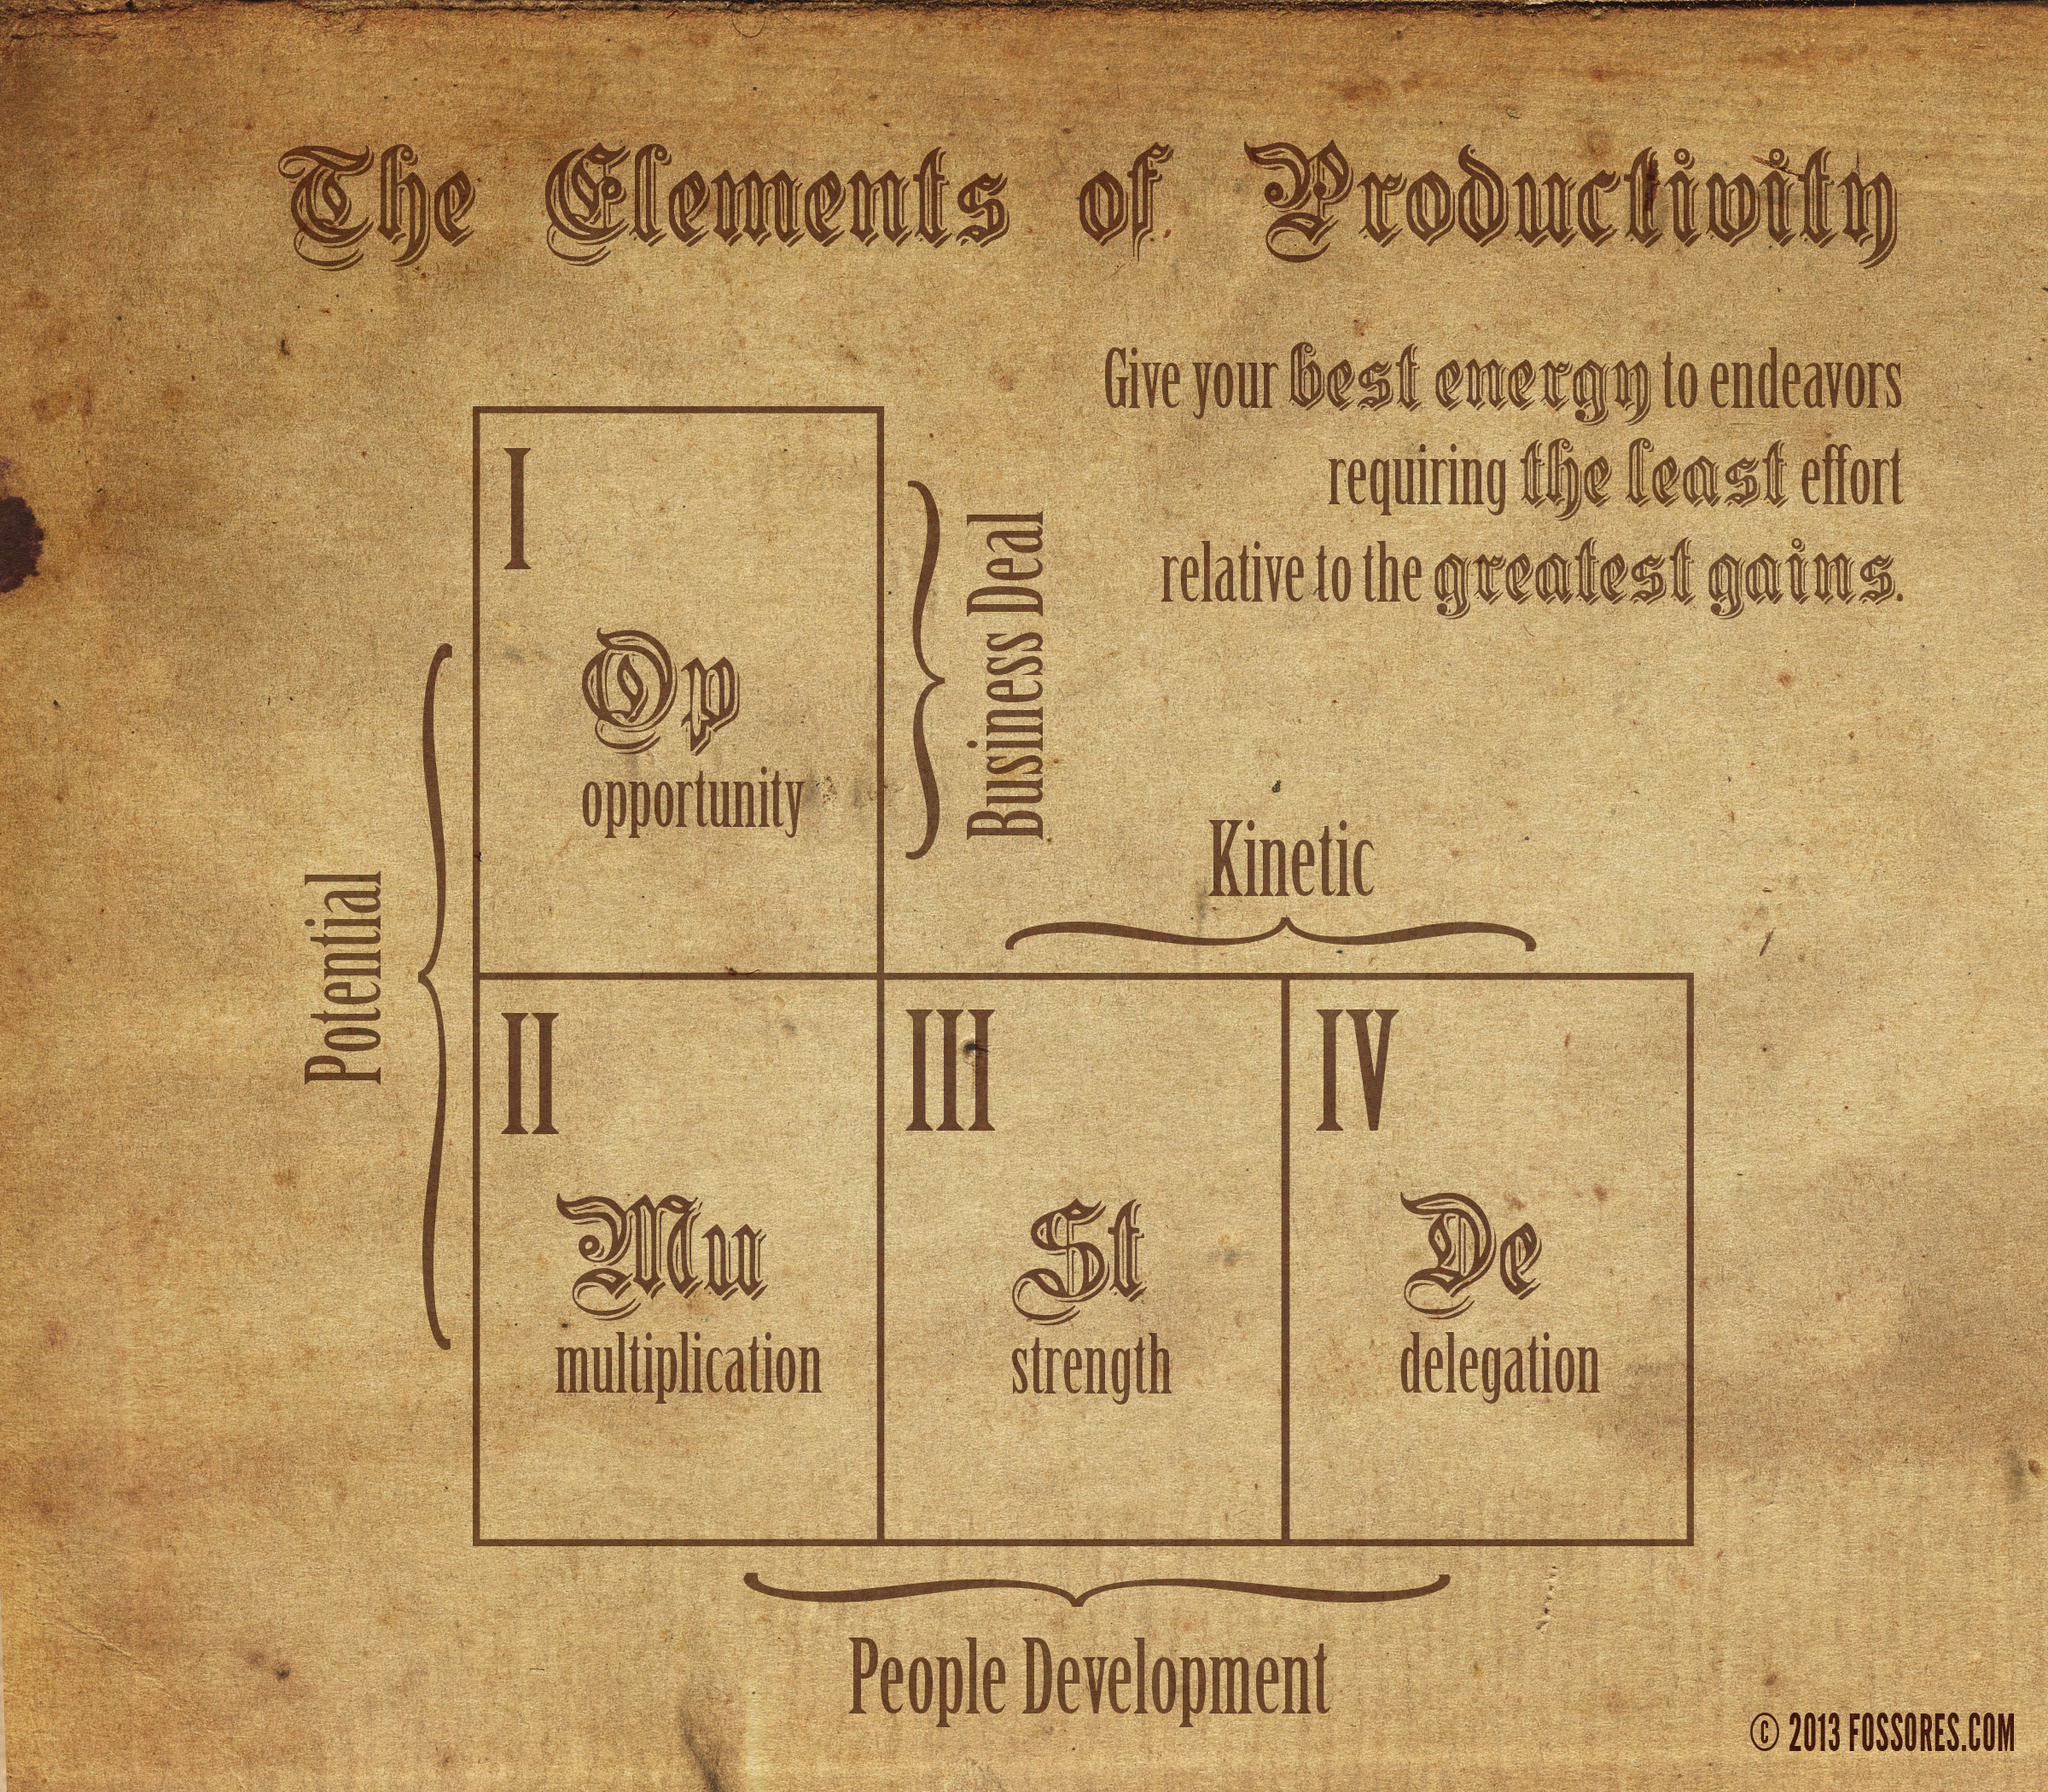 The Elements of Productivity